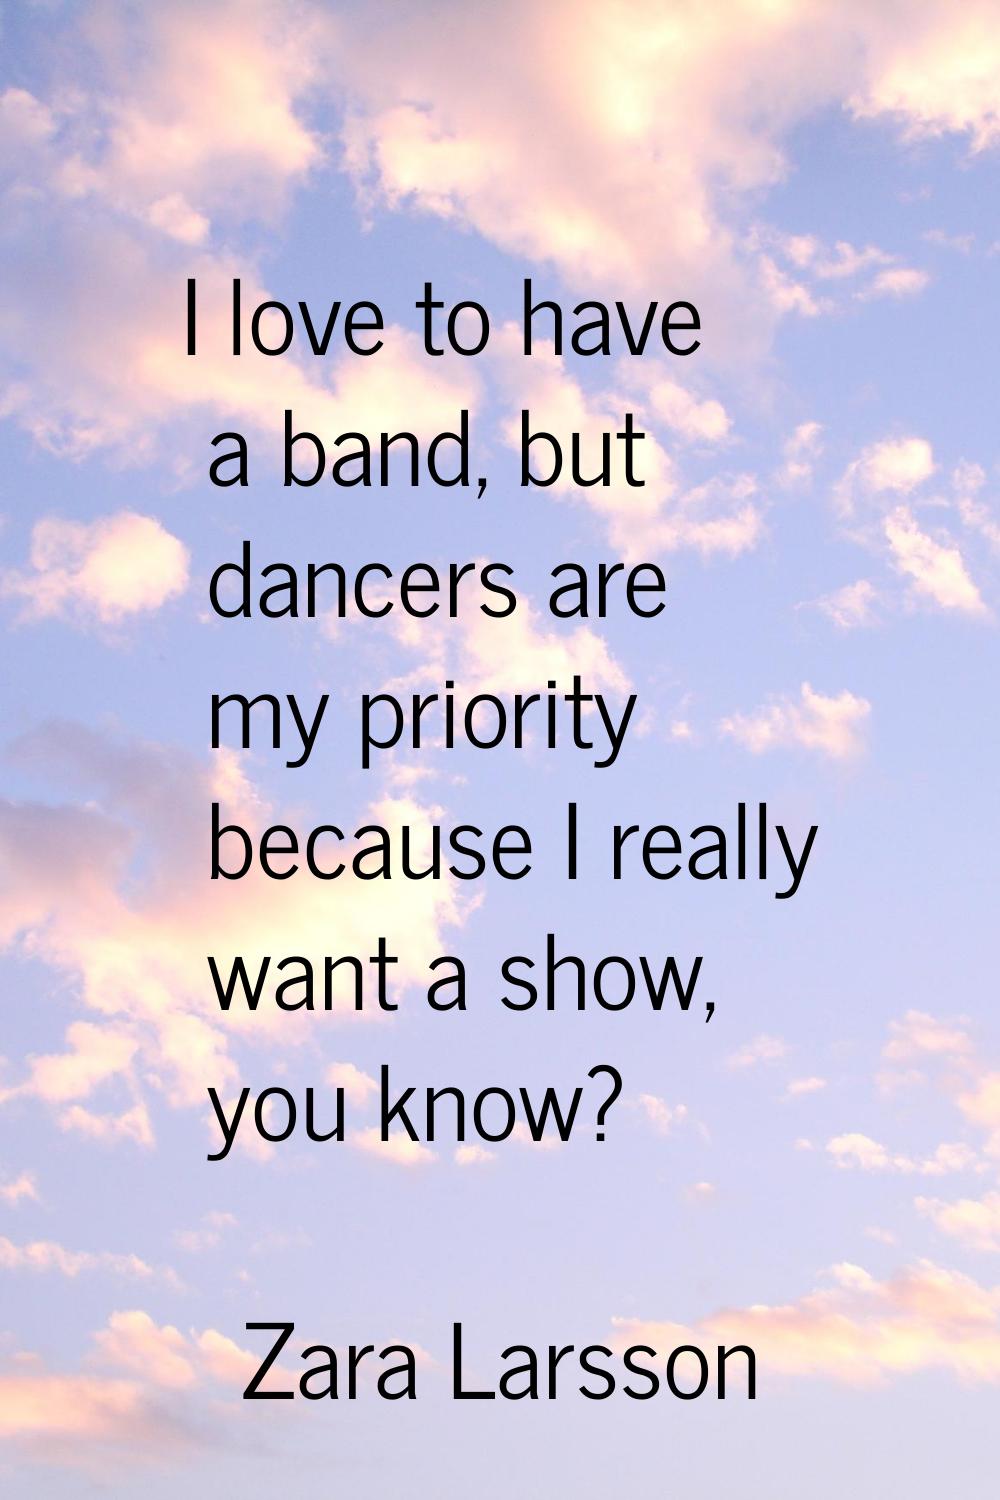 I love to have a band, but dancers are my priority because I really want a show, you know?